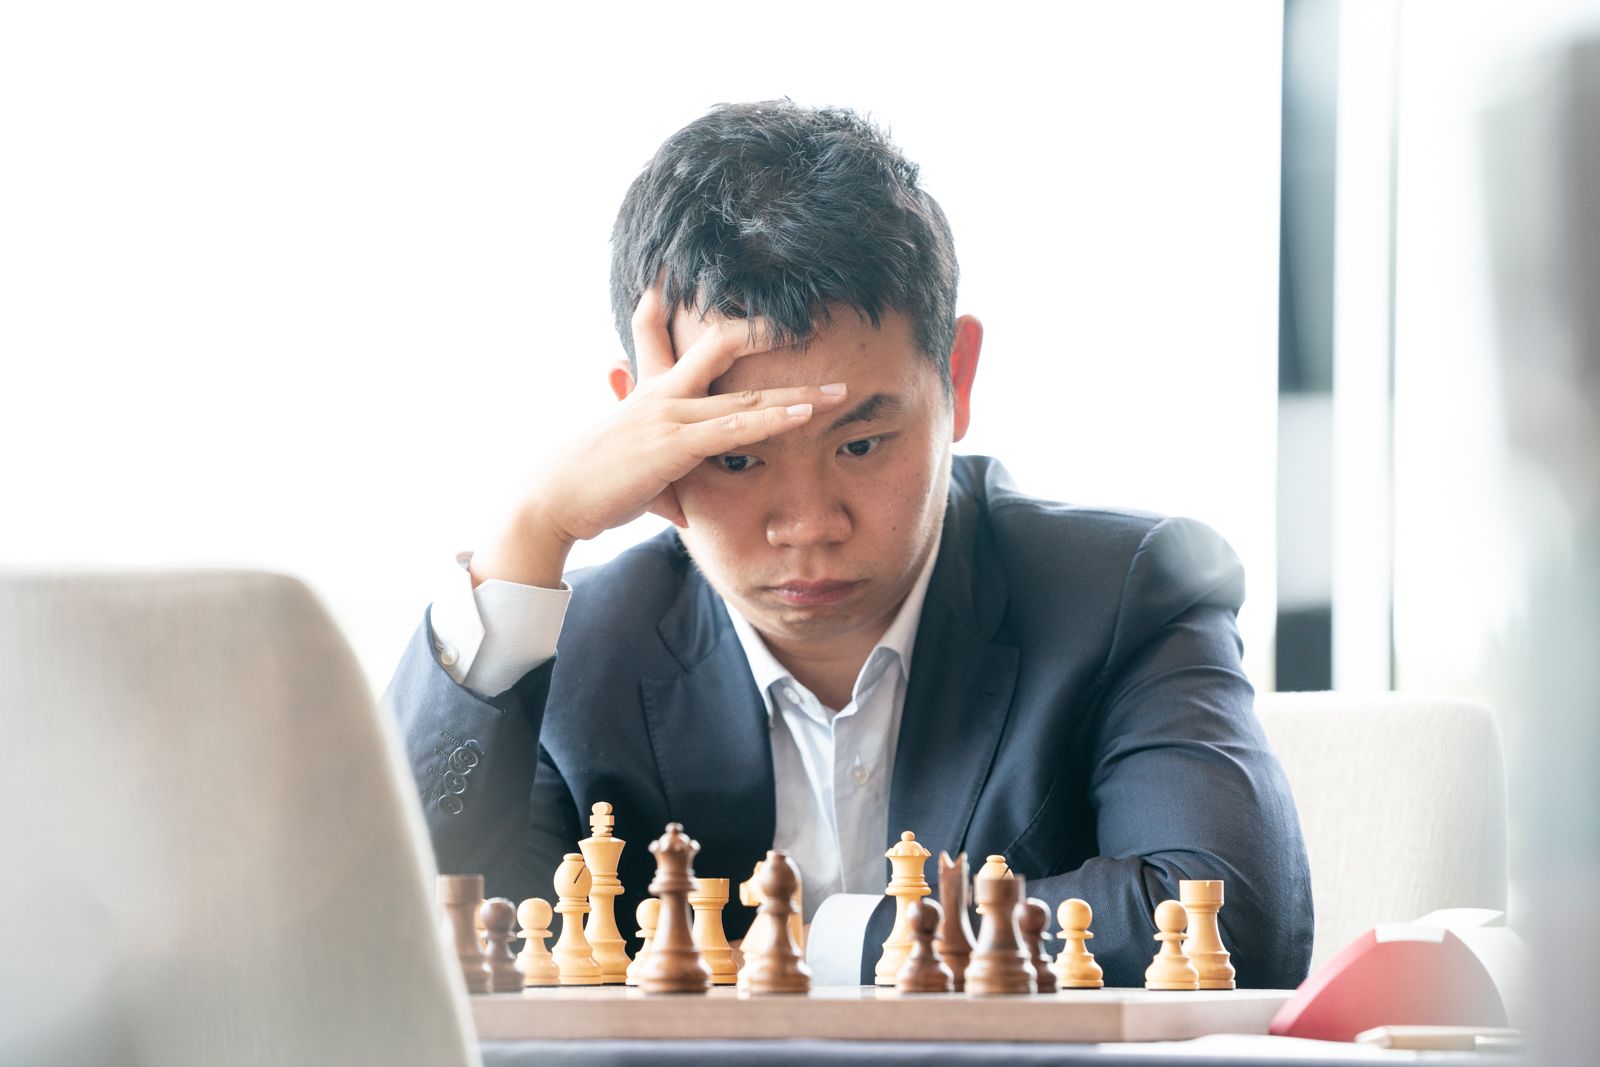 Wang Hao wins it all! 9 Grand Swiss conclusions